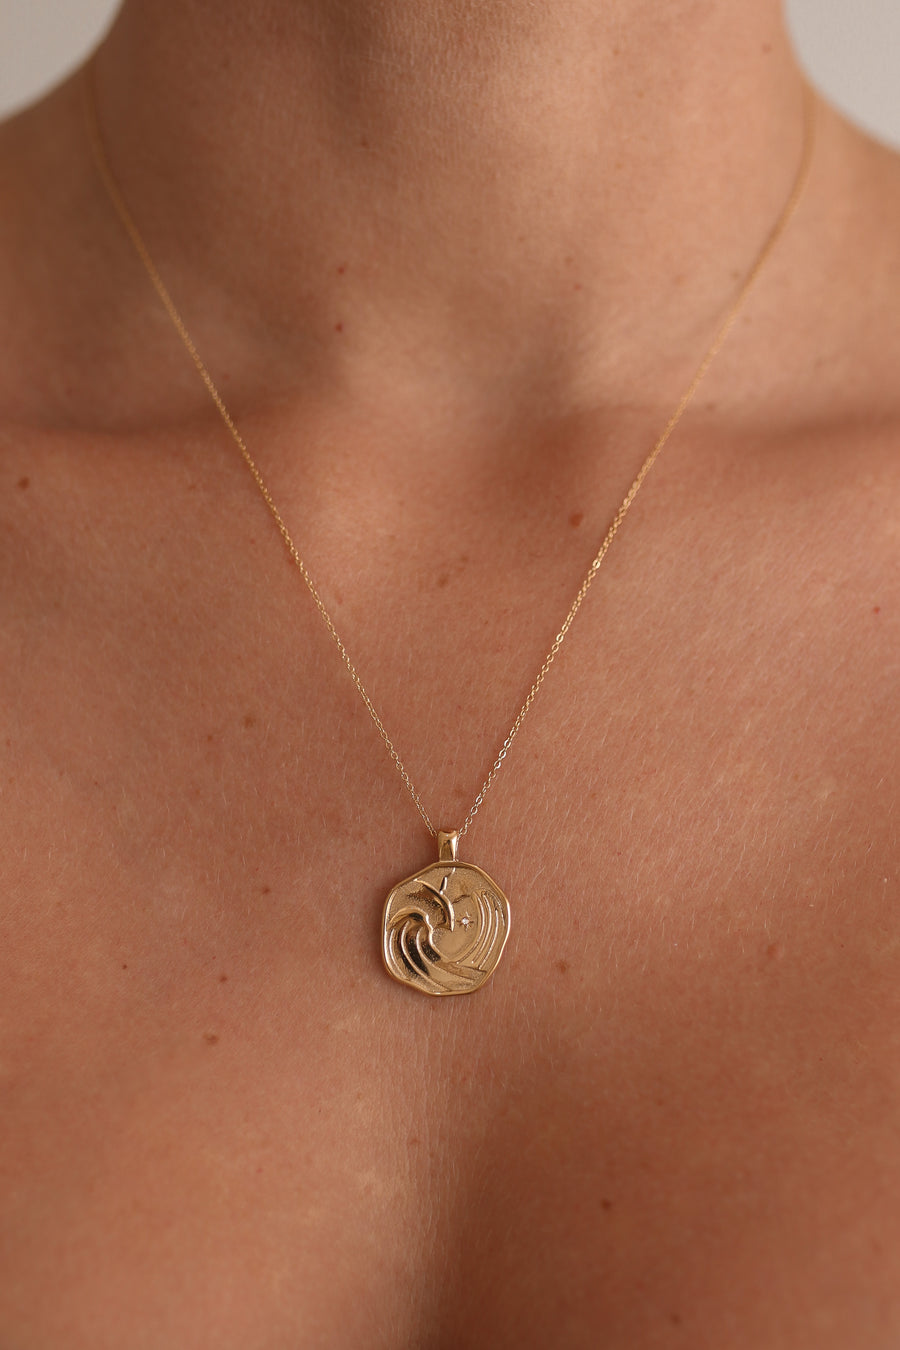 Water Element Necklace 14ct Gold or Silver Plated Stainless Steel